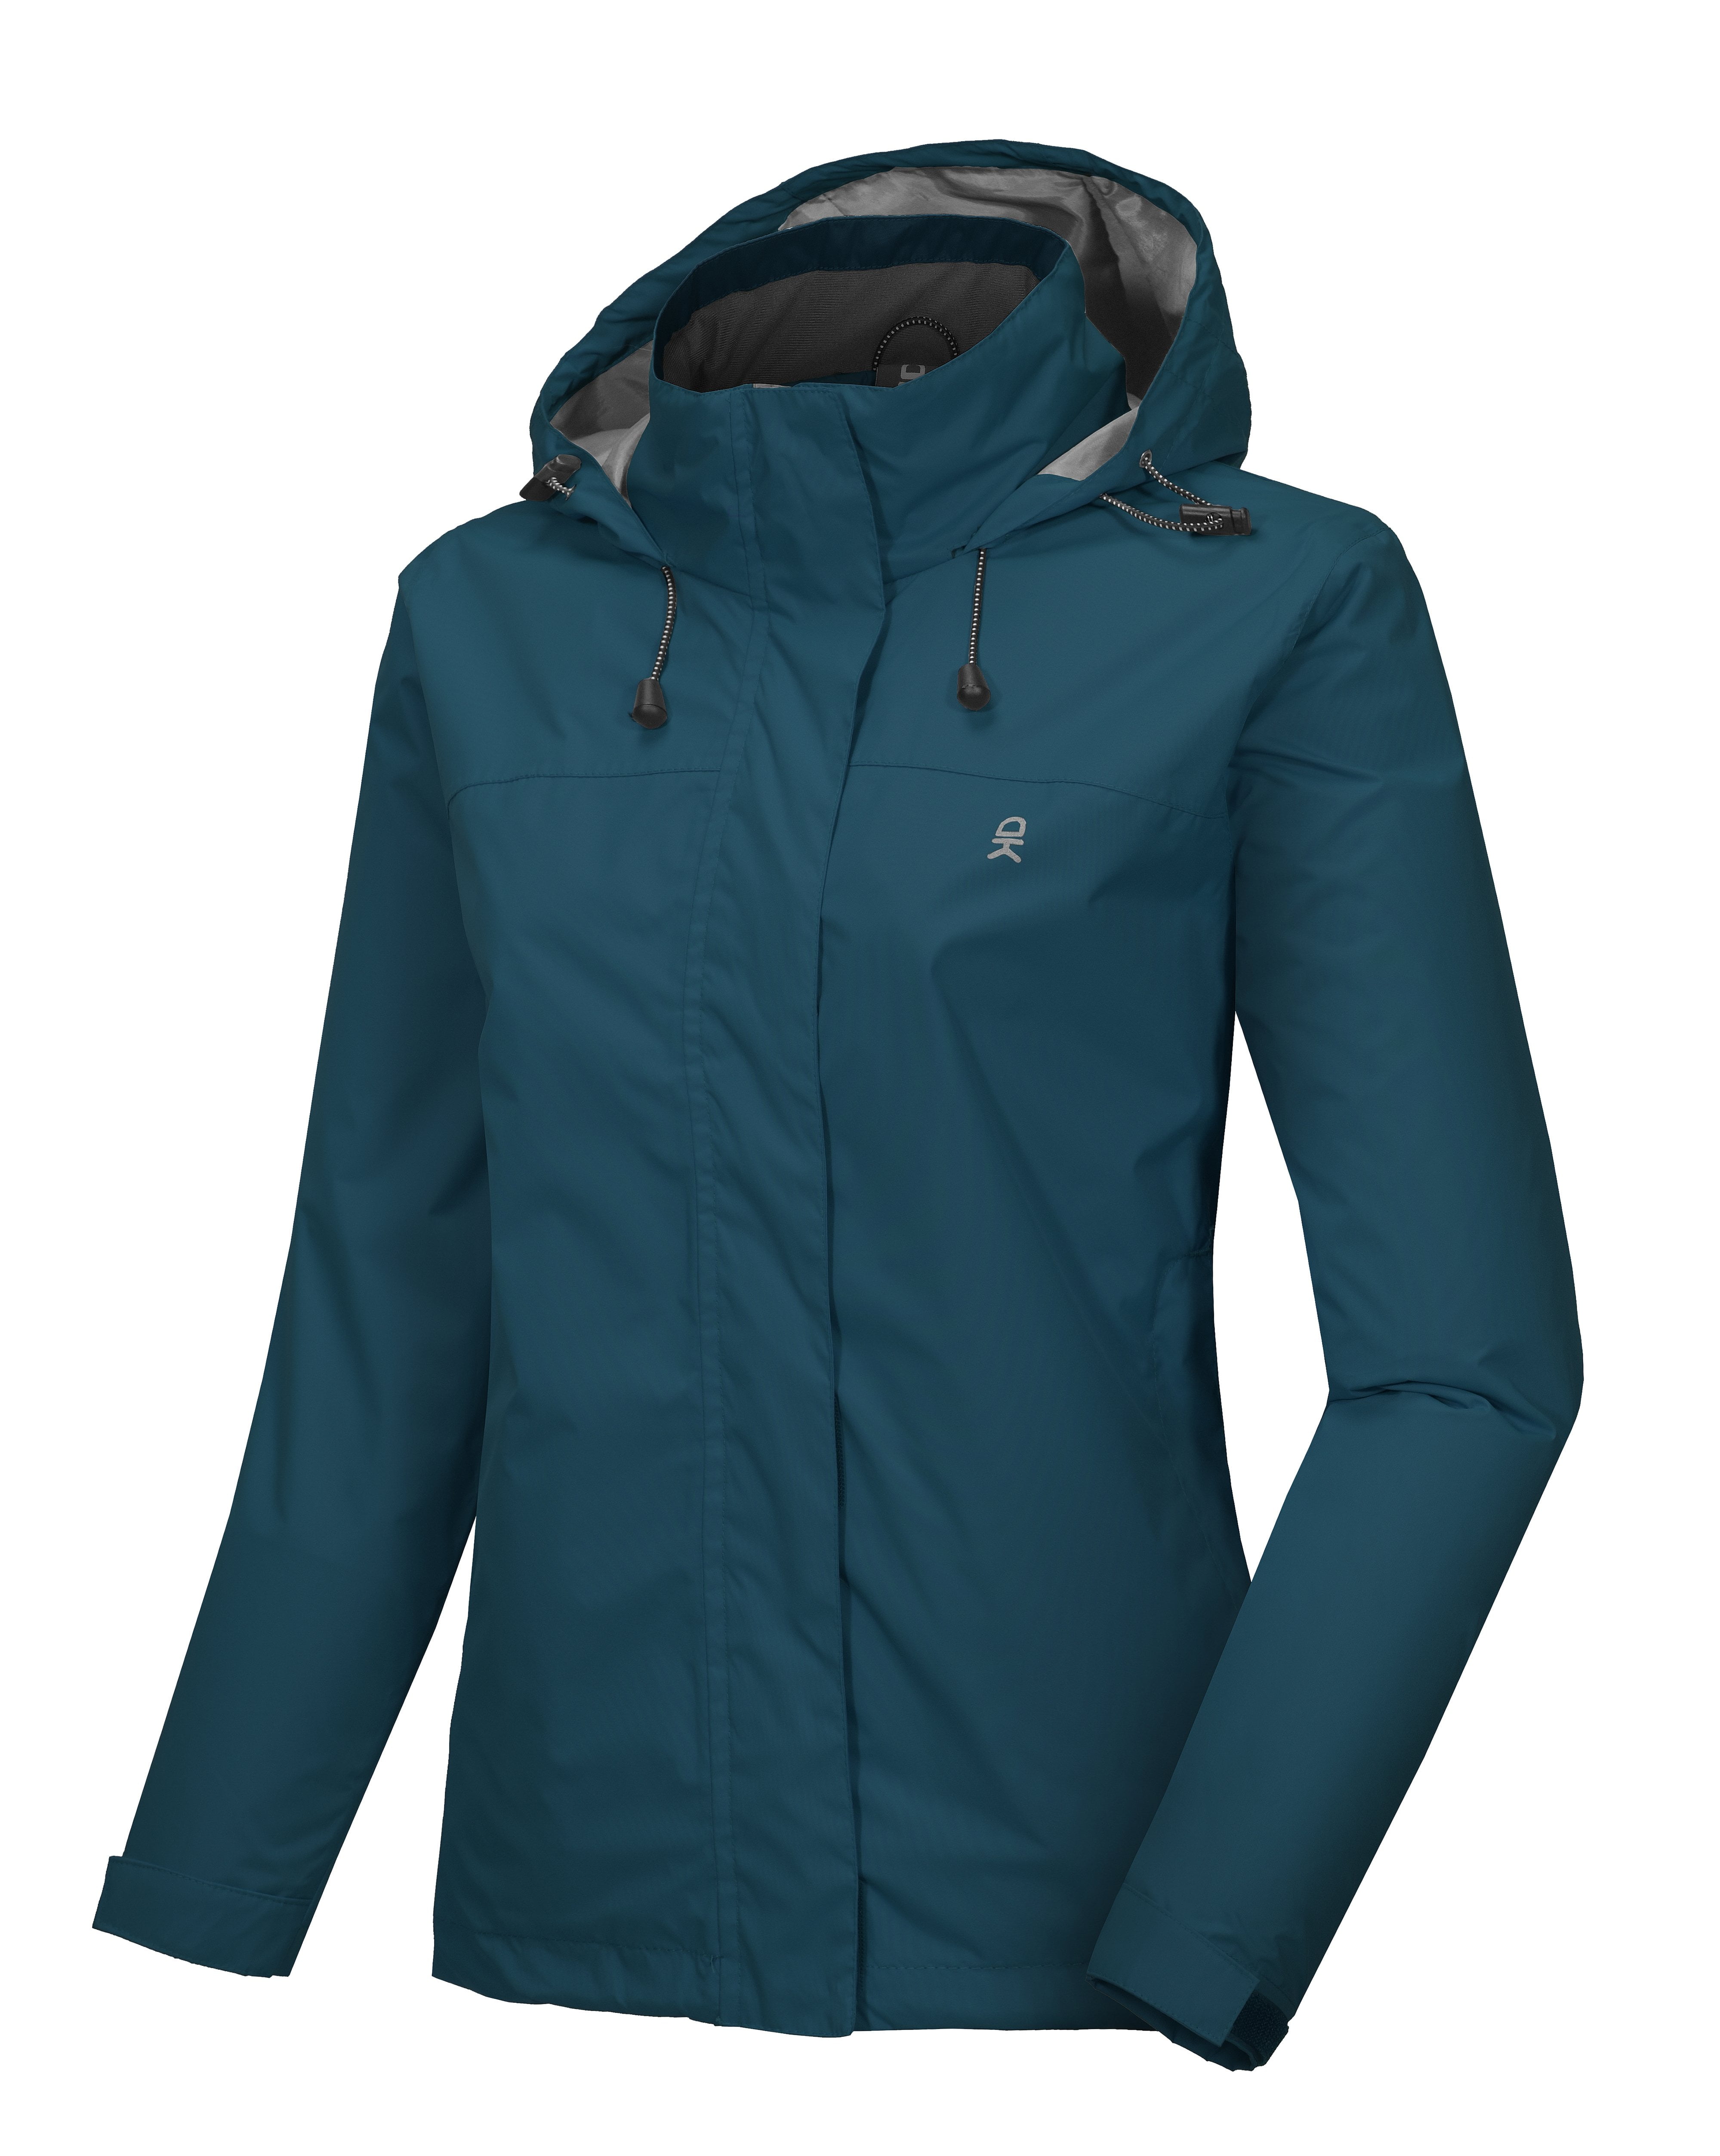 Fleece Lined and Water Repellent Little Donkey Andy Women's Softshell Jacket Ski Jacket with Removable Hood